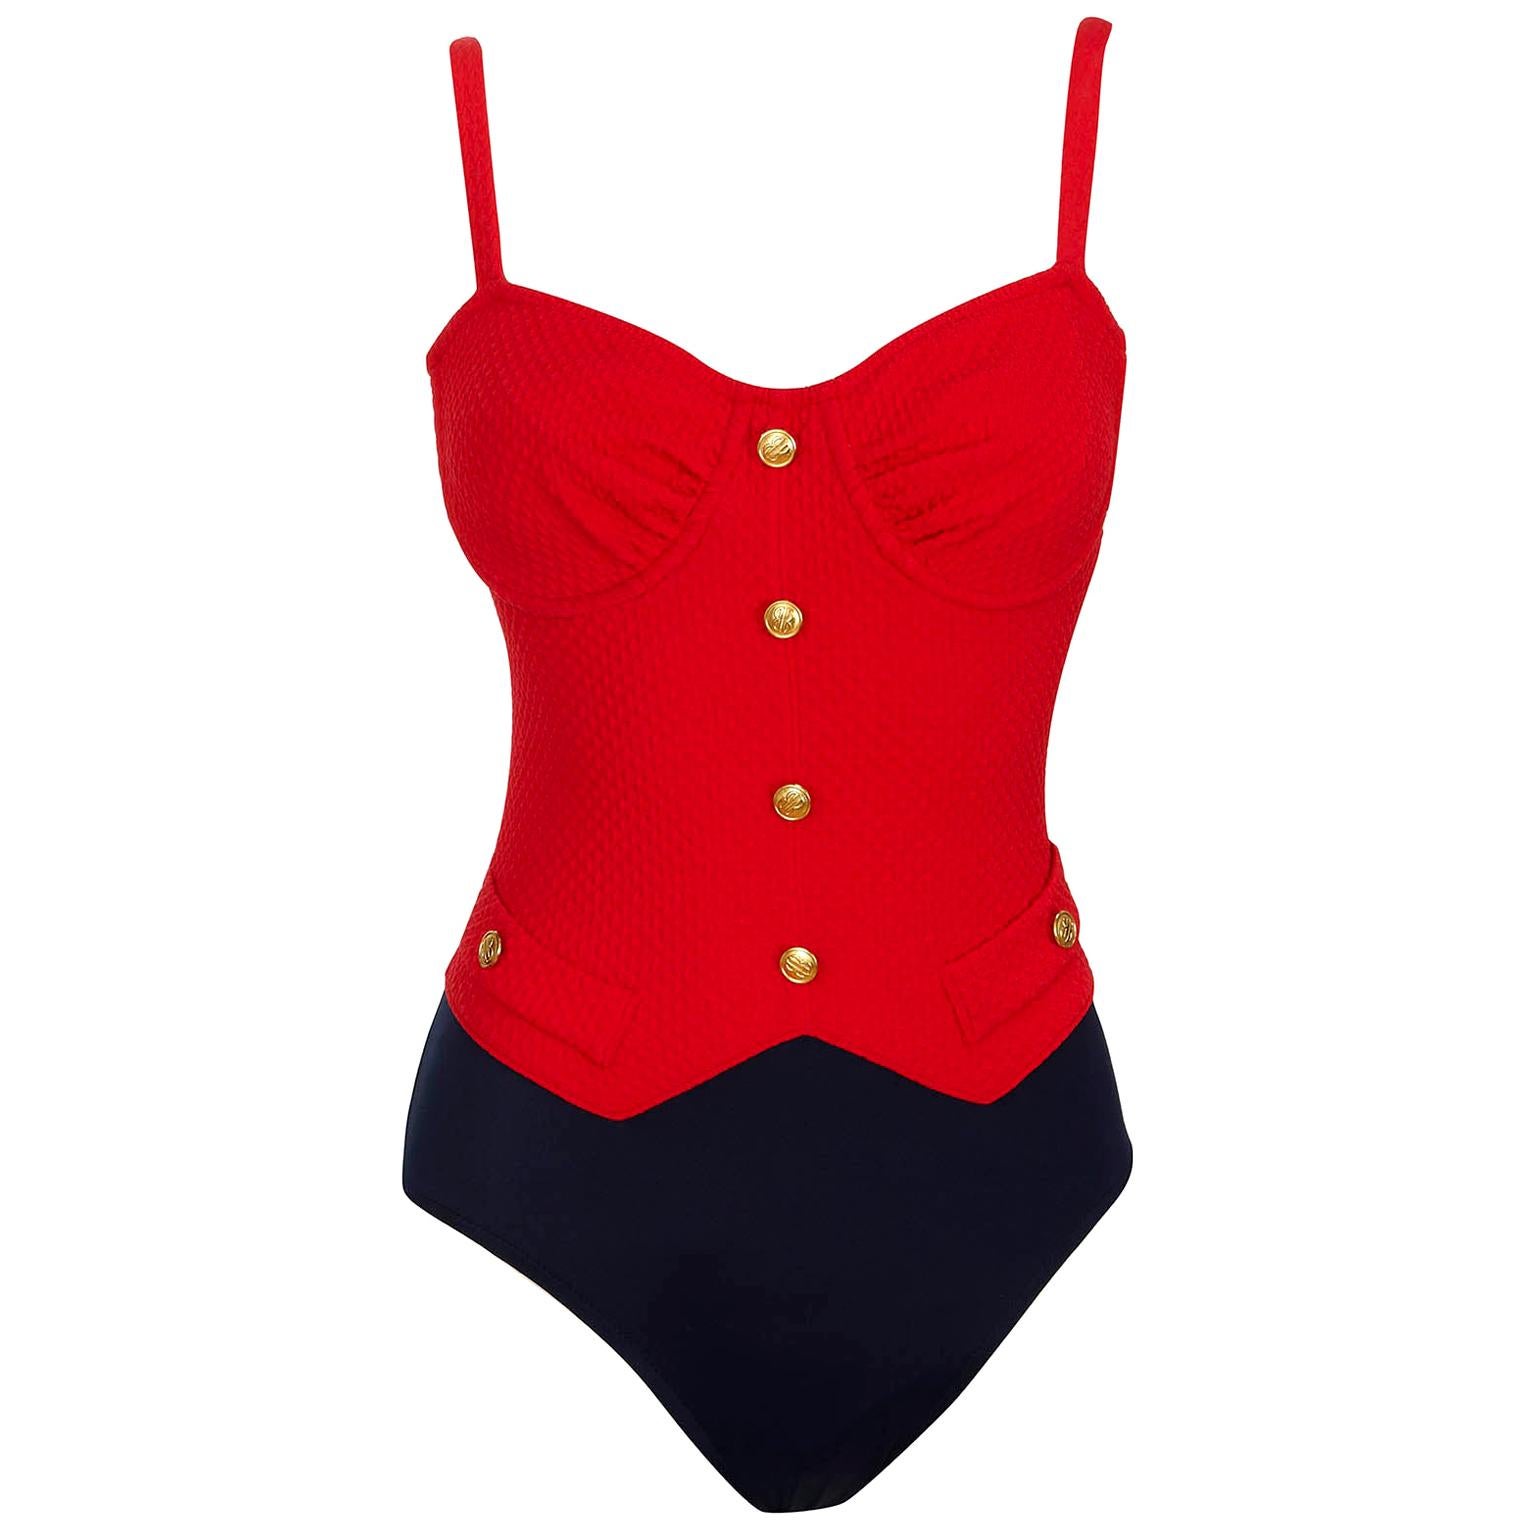 Bill Blass Swimsuit - 1980s Vintage - Red & Navy Lycra - Faux Pockets + Buttons